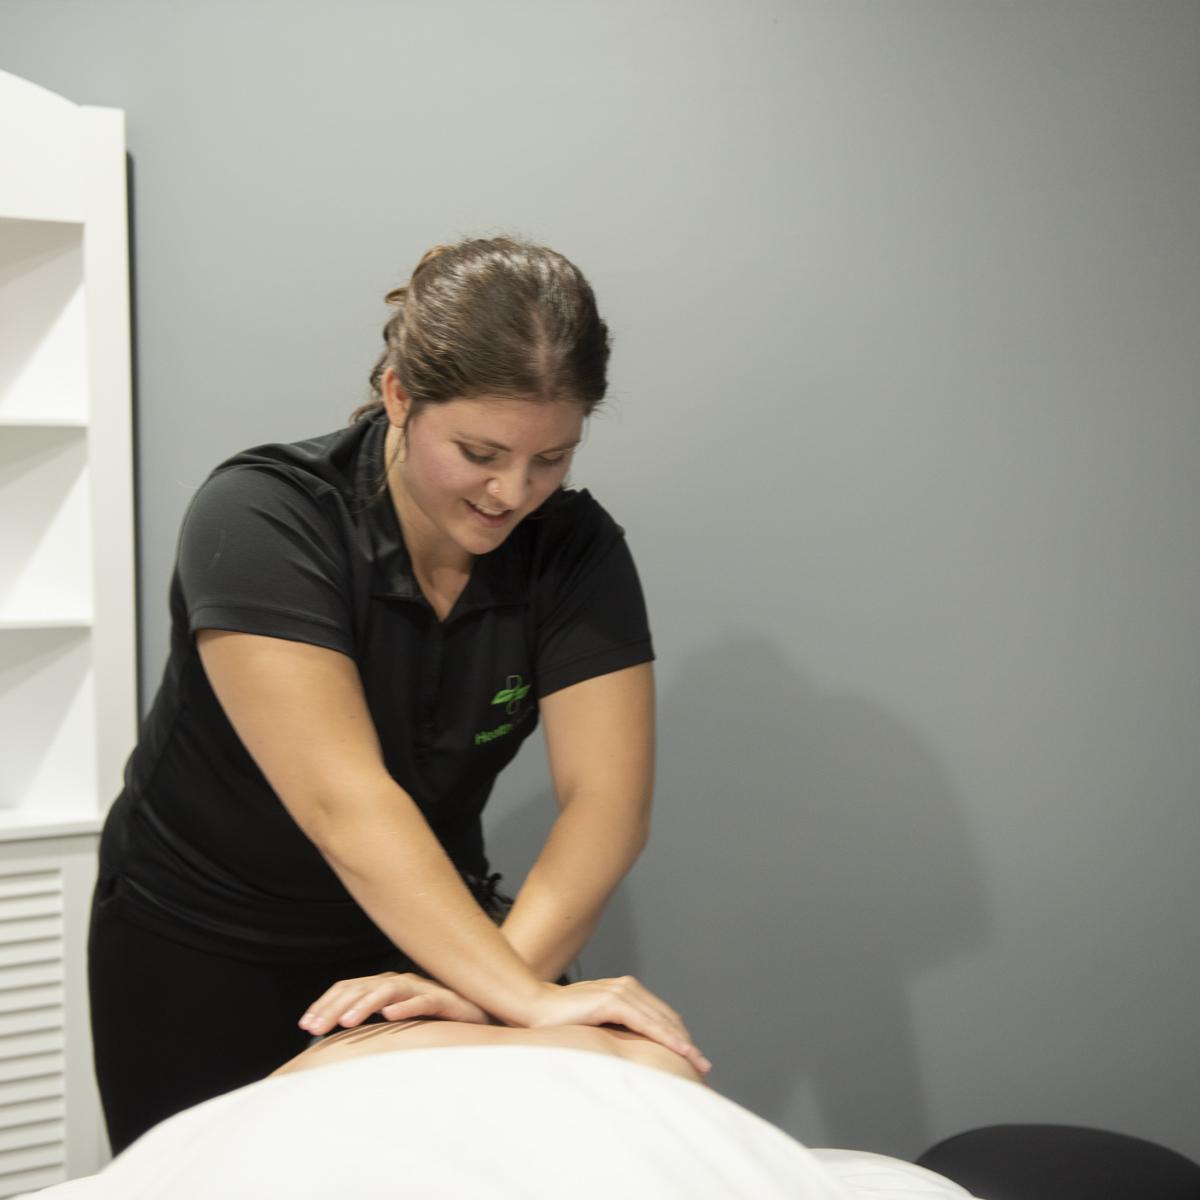 Massage Therapy performed by a registered massage therapist